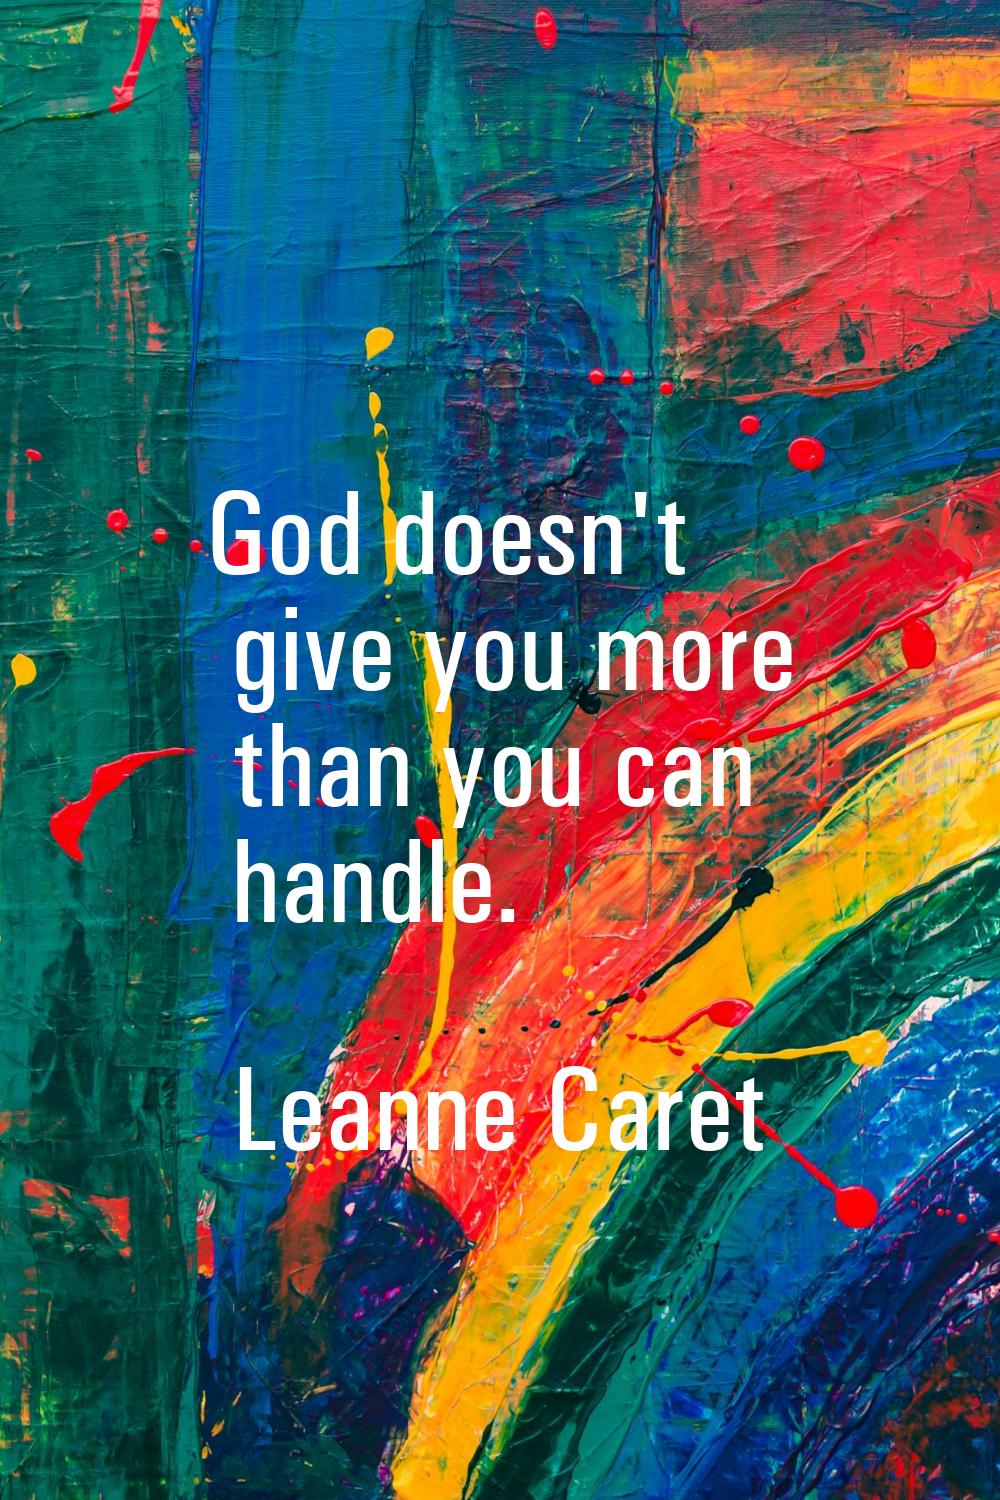 God doesn't give you more than you can handle.